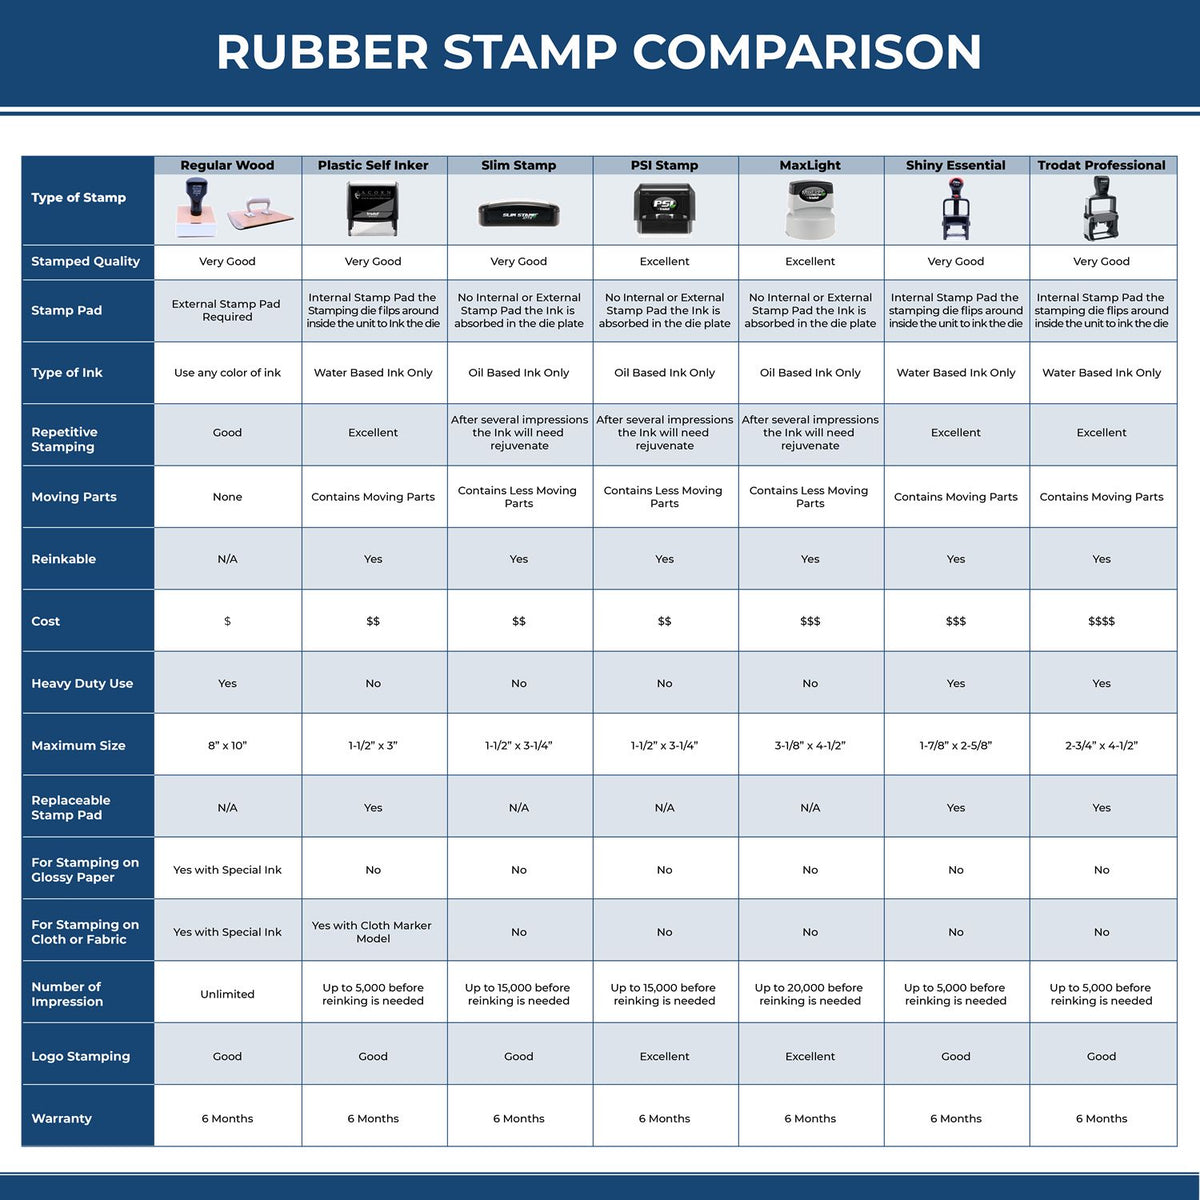 Please See Me Rubber Stamp 4783R Rubber Stamp Comparison